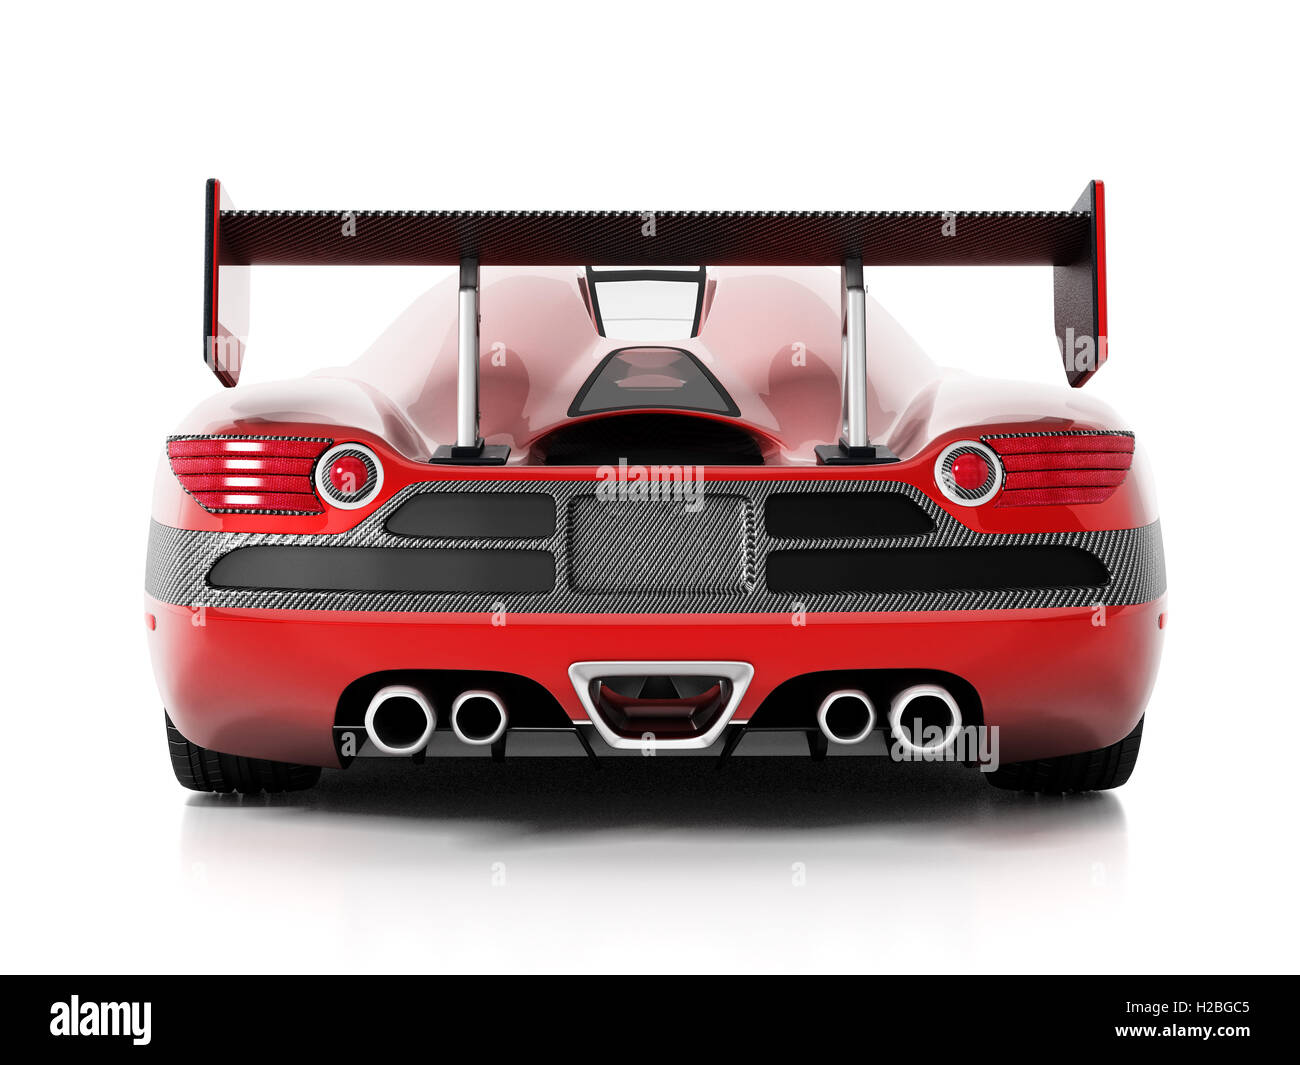 Red race car with carbon fiber spoiler. 3D illustration. Stock Photo